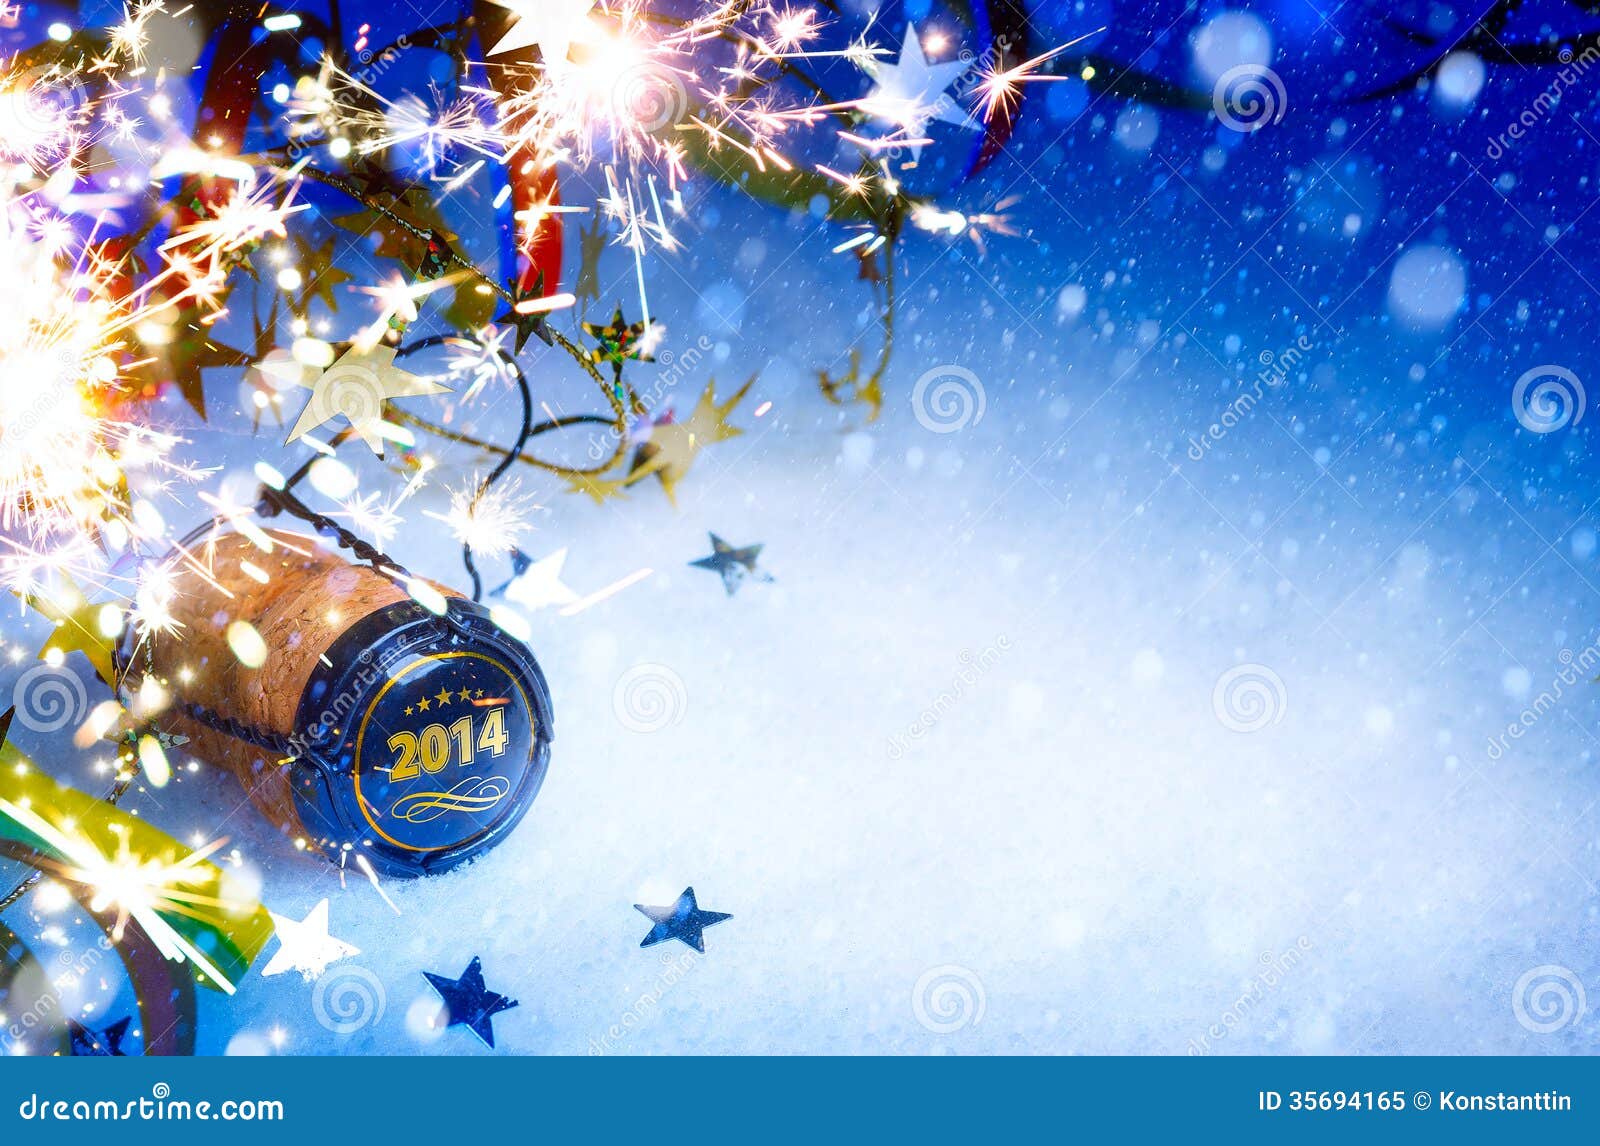 448,930 New Year Party Background Stock Photos - Free & Royalty-Free Stock  Photos from Dreamstime